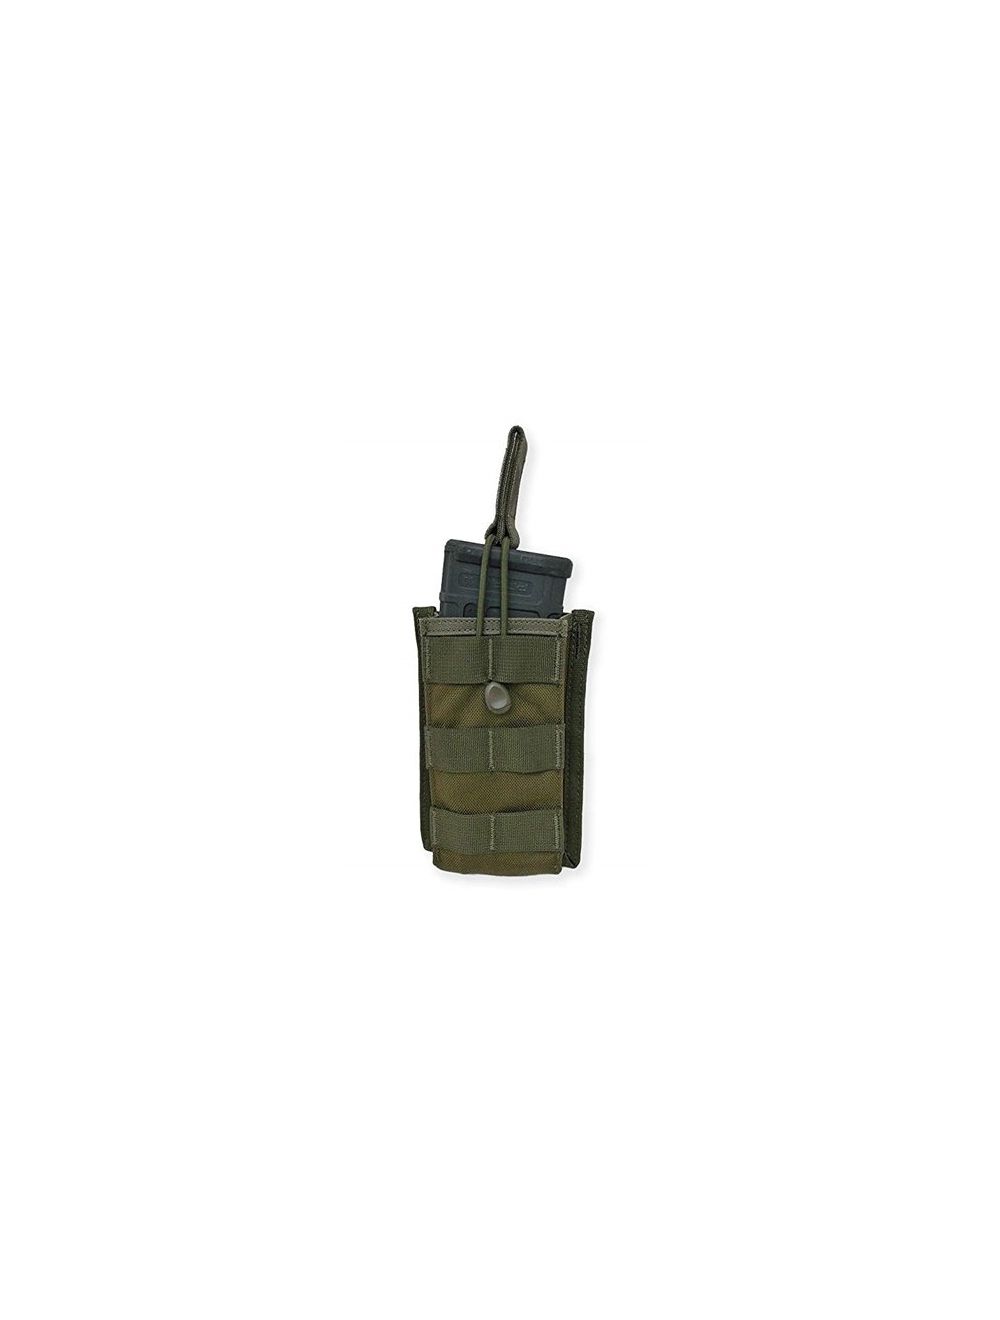 The Peacekeeper Single Mag Pouch